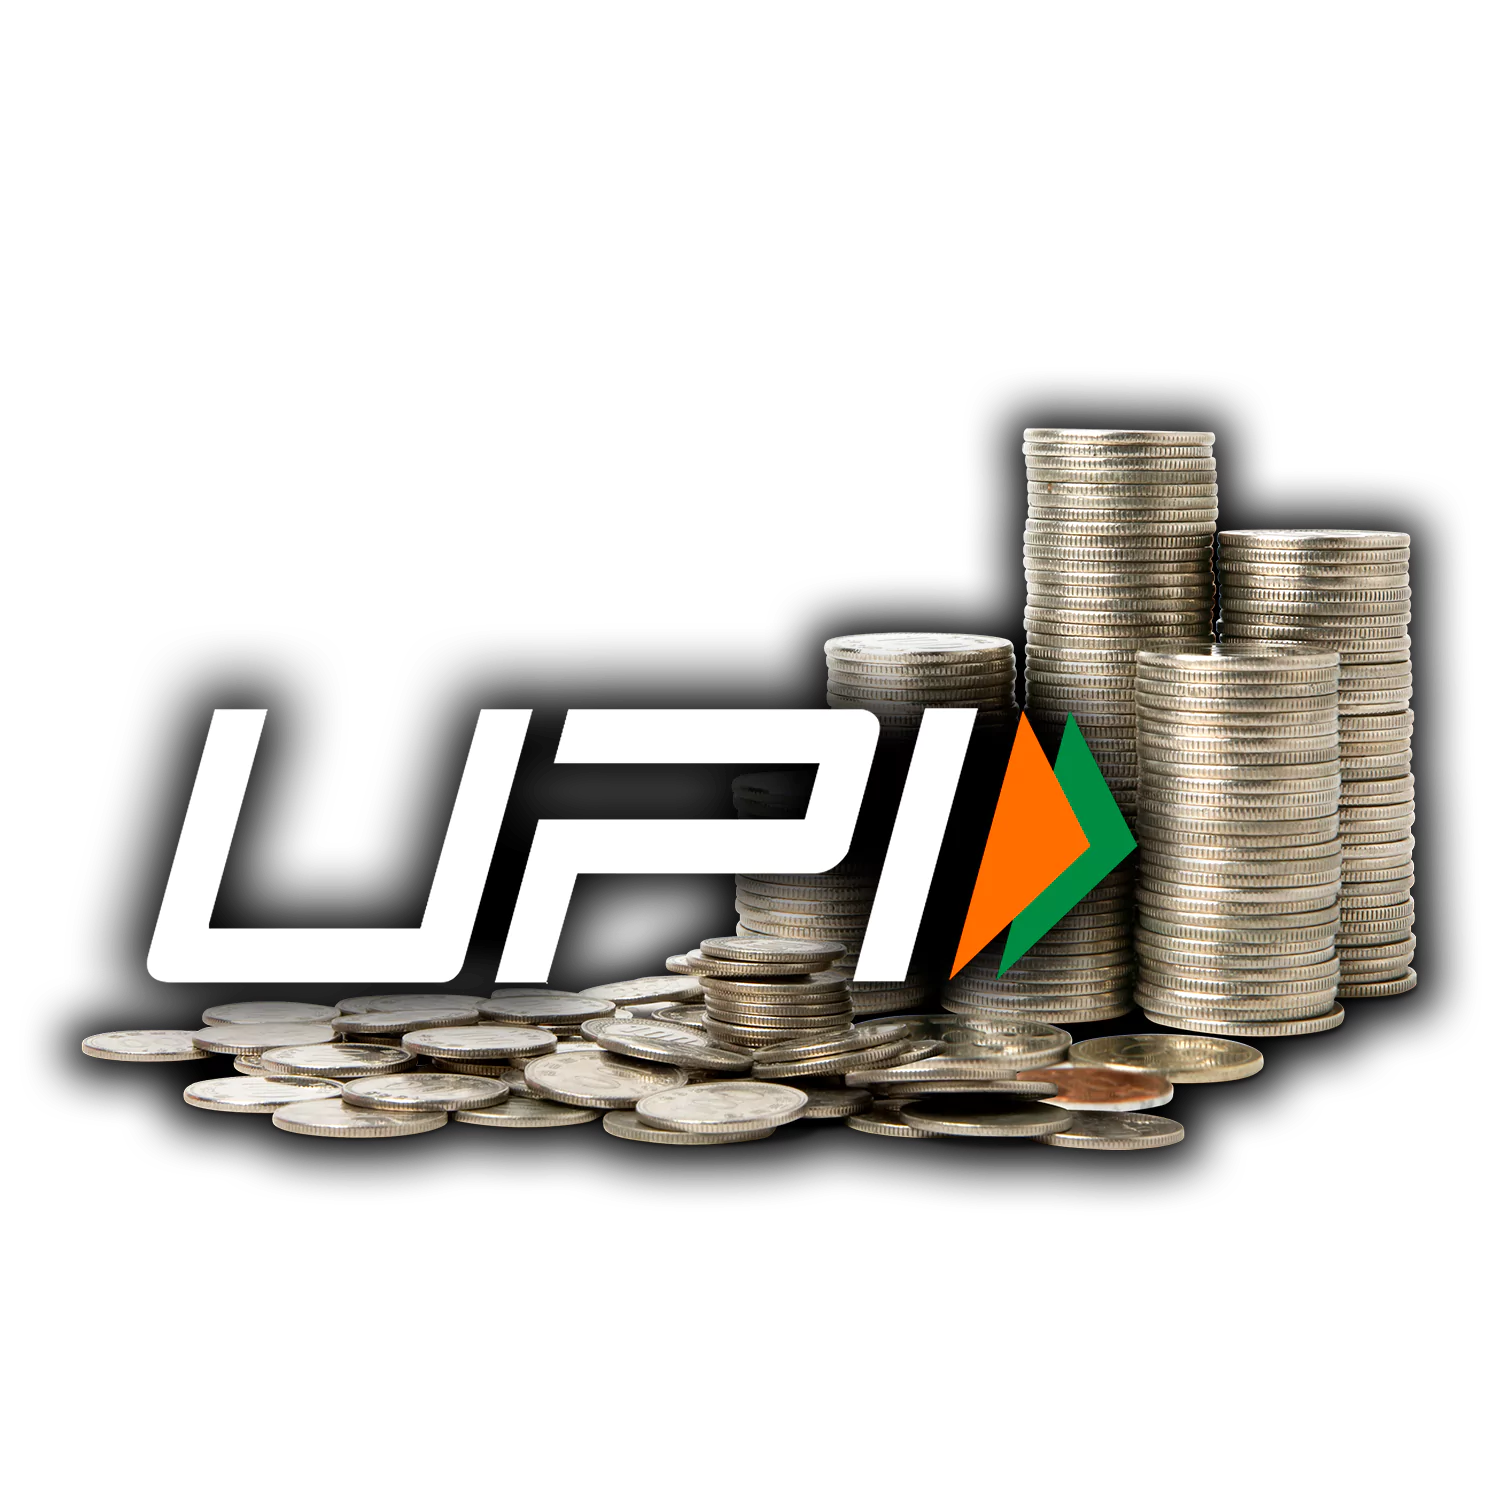 In this article, we share our review of UPI.